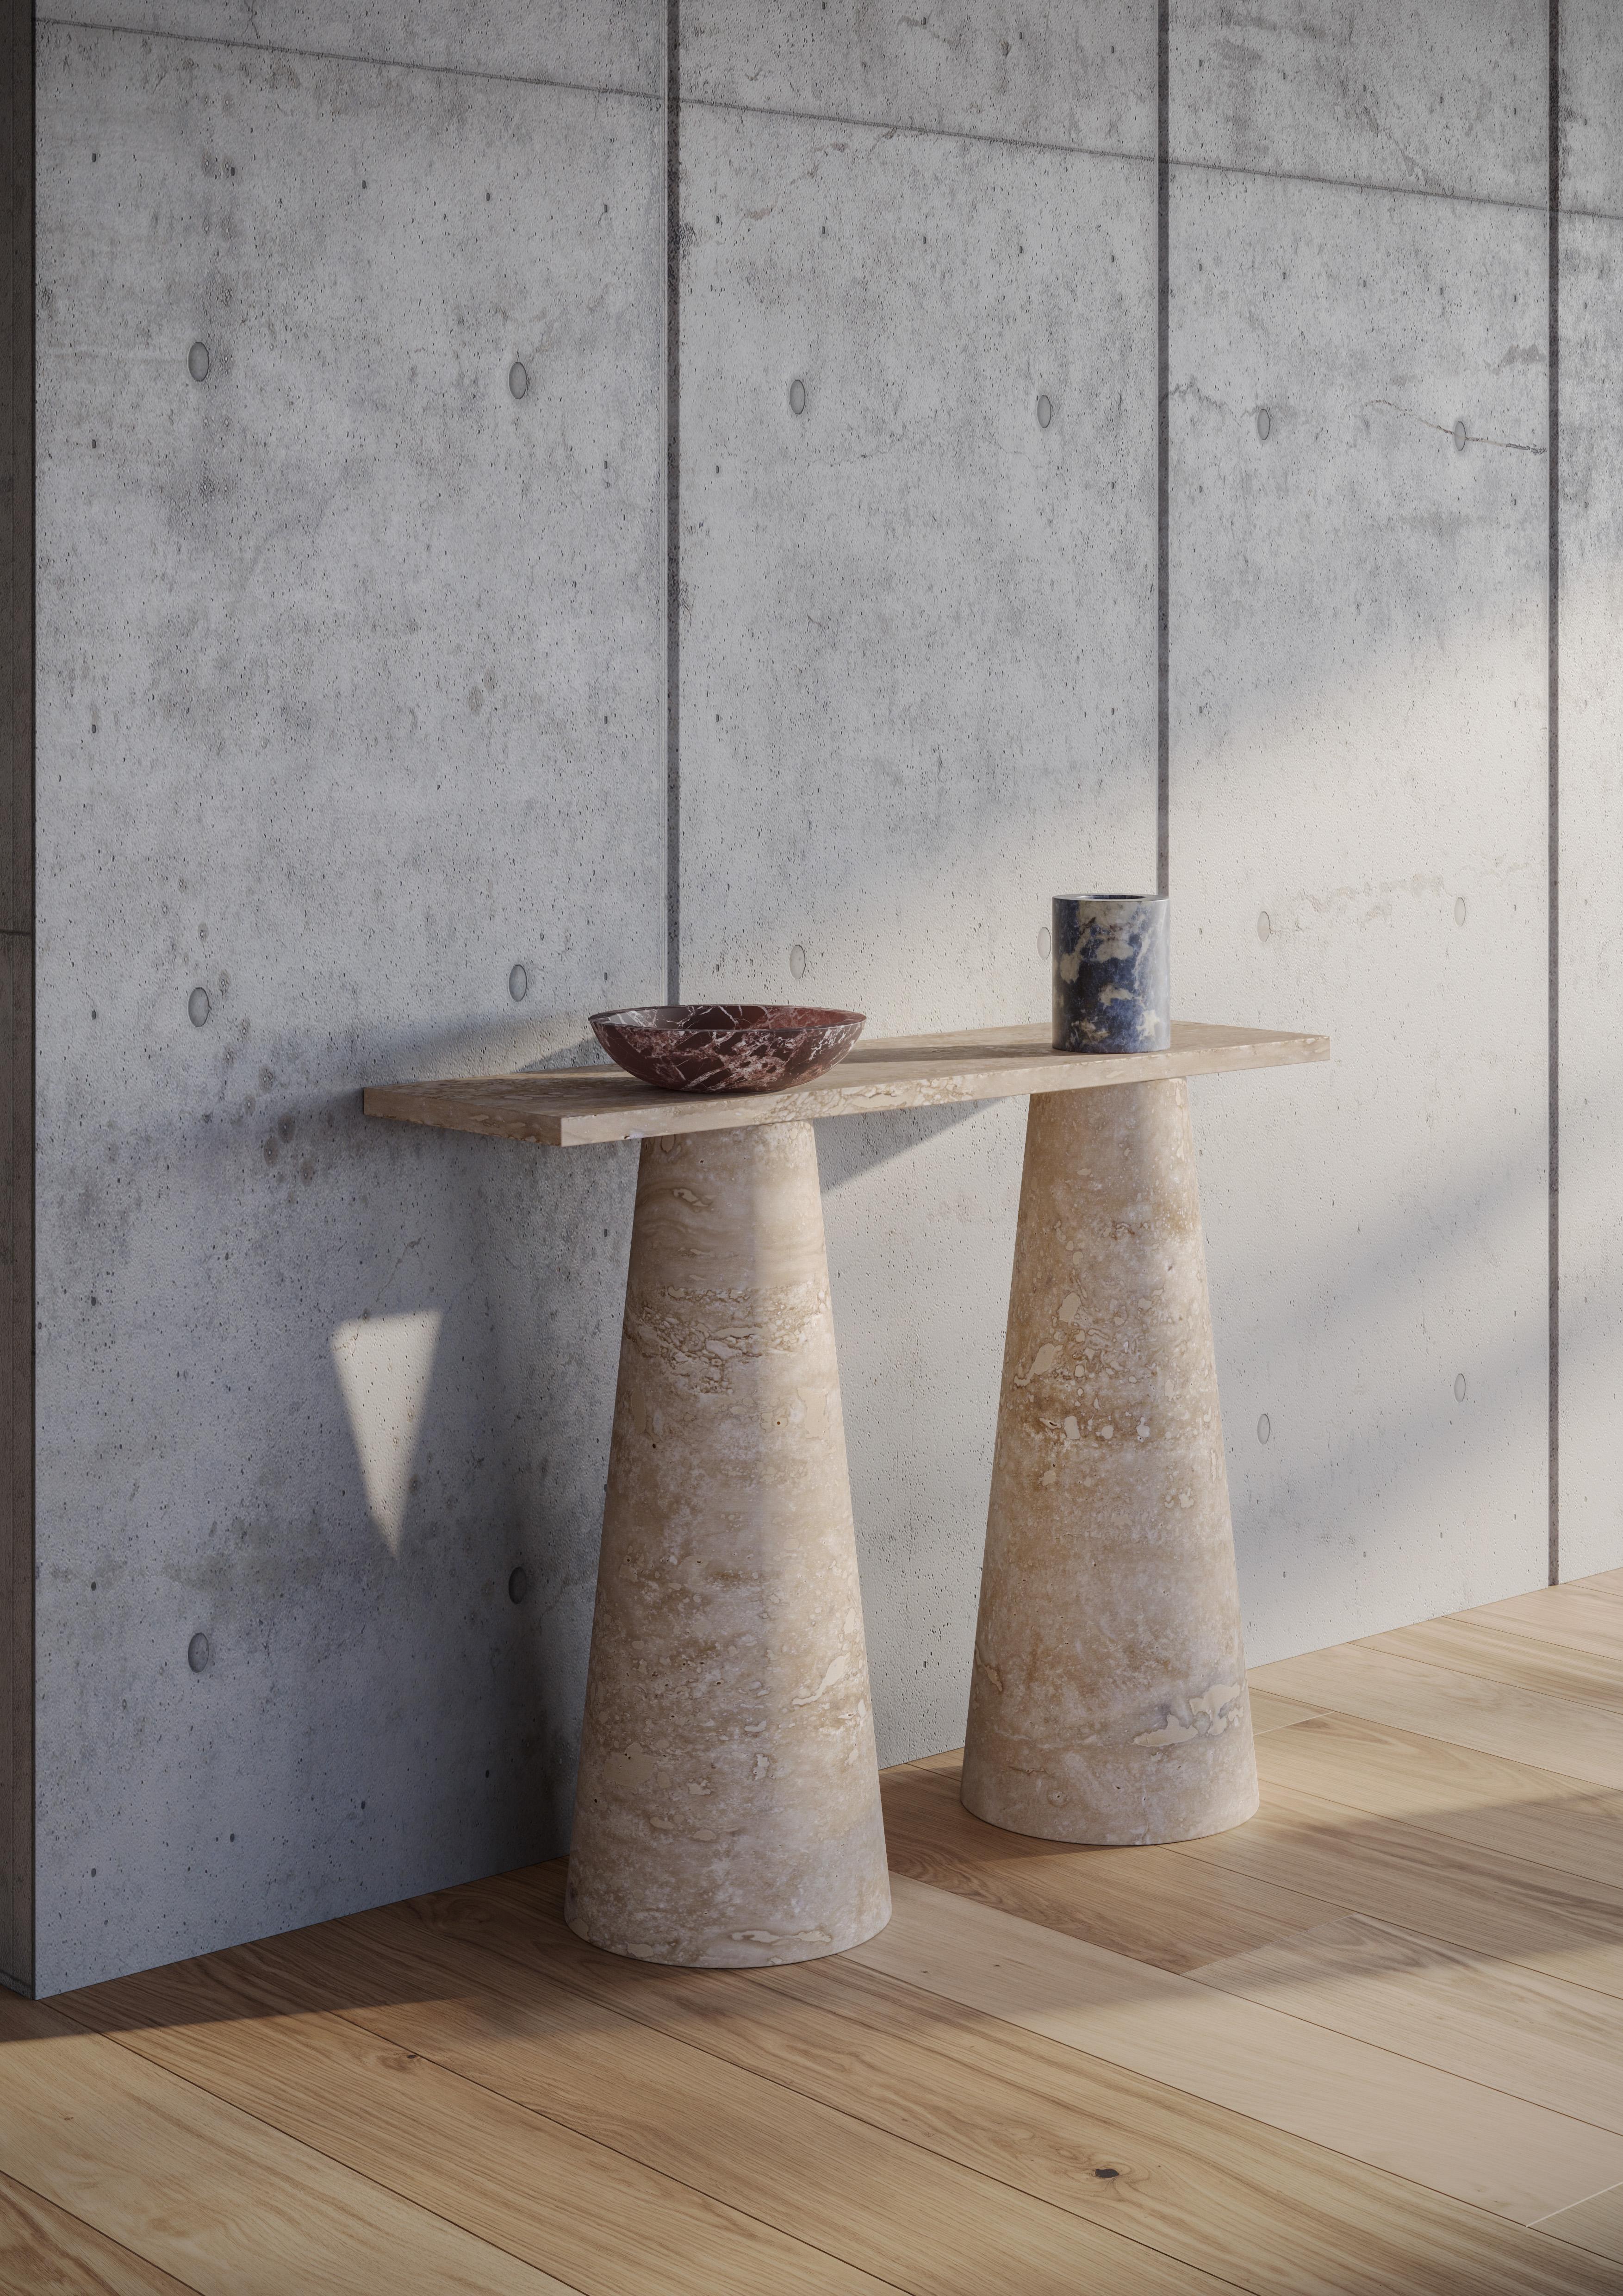 Travertino inside out console by Karen Chekerdjian
Dimensions: H120 x D36 x W90
Materials: Travertino.

Karen’s trajectory into designing was unsystematic, comprised of a combination of practical experience in various creative fields and